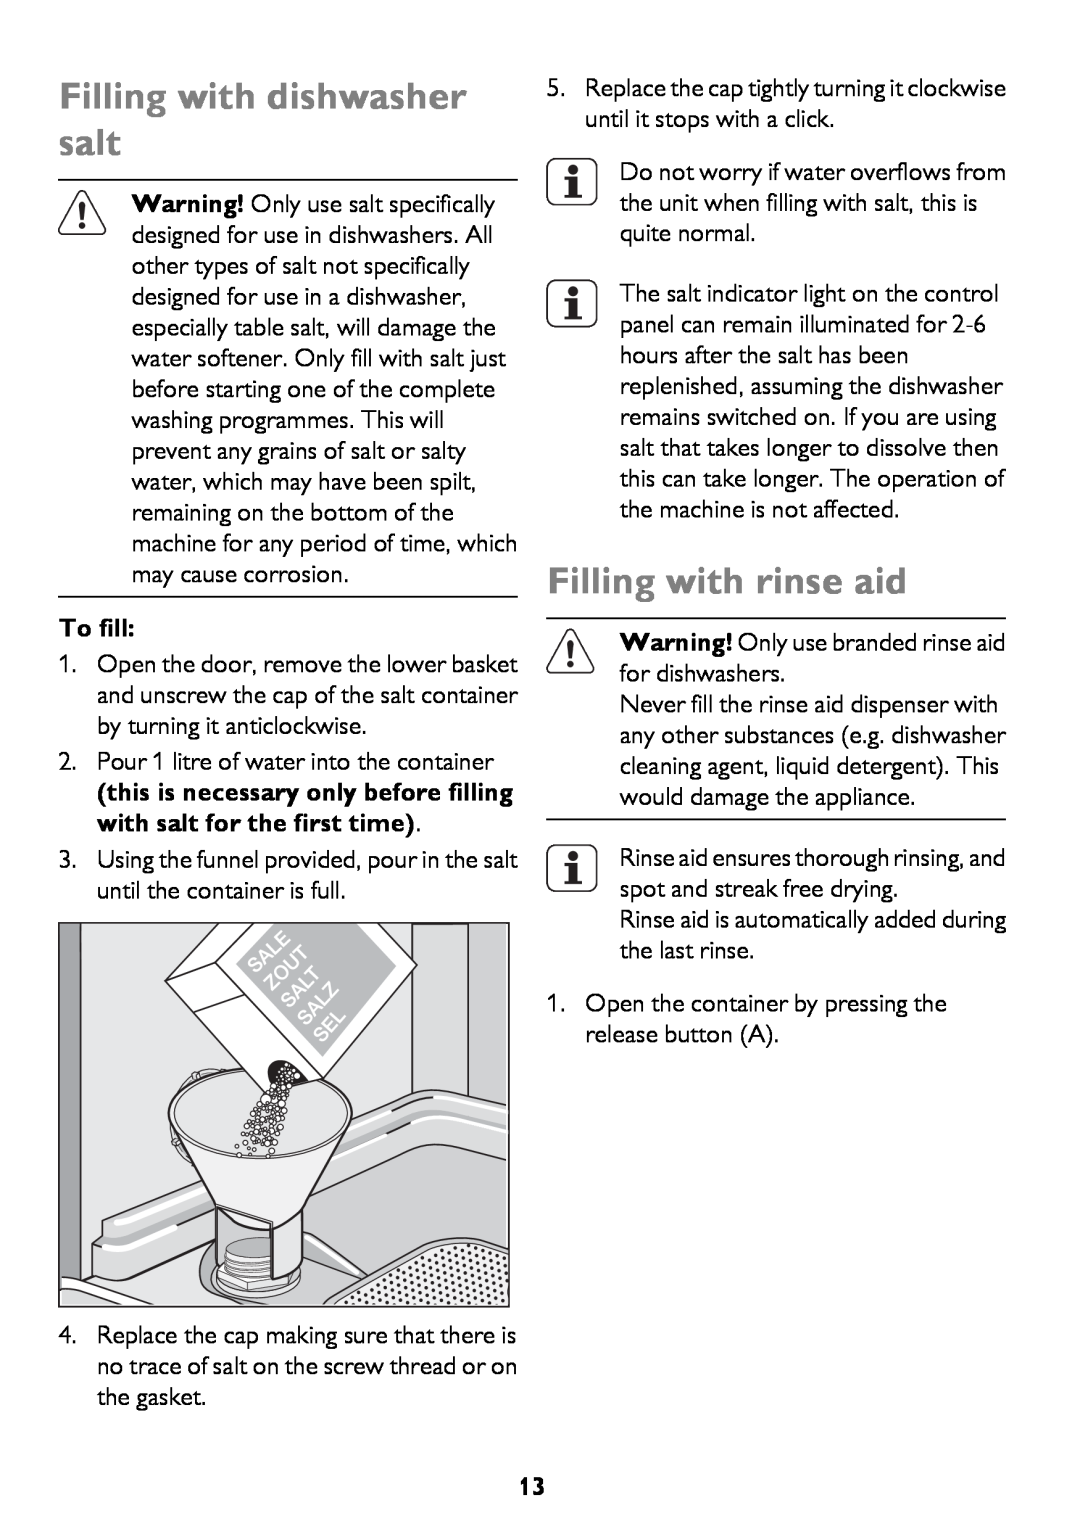 John Lewis JLDWW 906 instruction manual Filling with dishwasher salt, Filling with rinse aid, To fill 